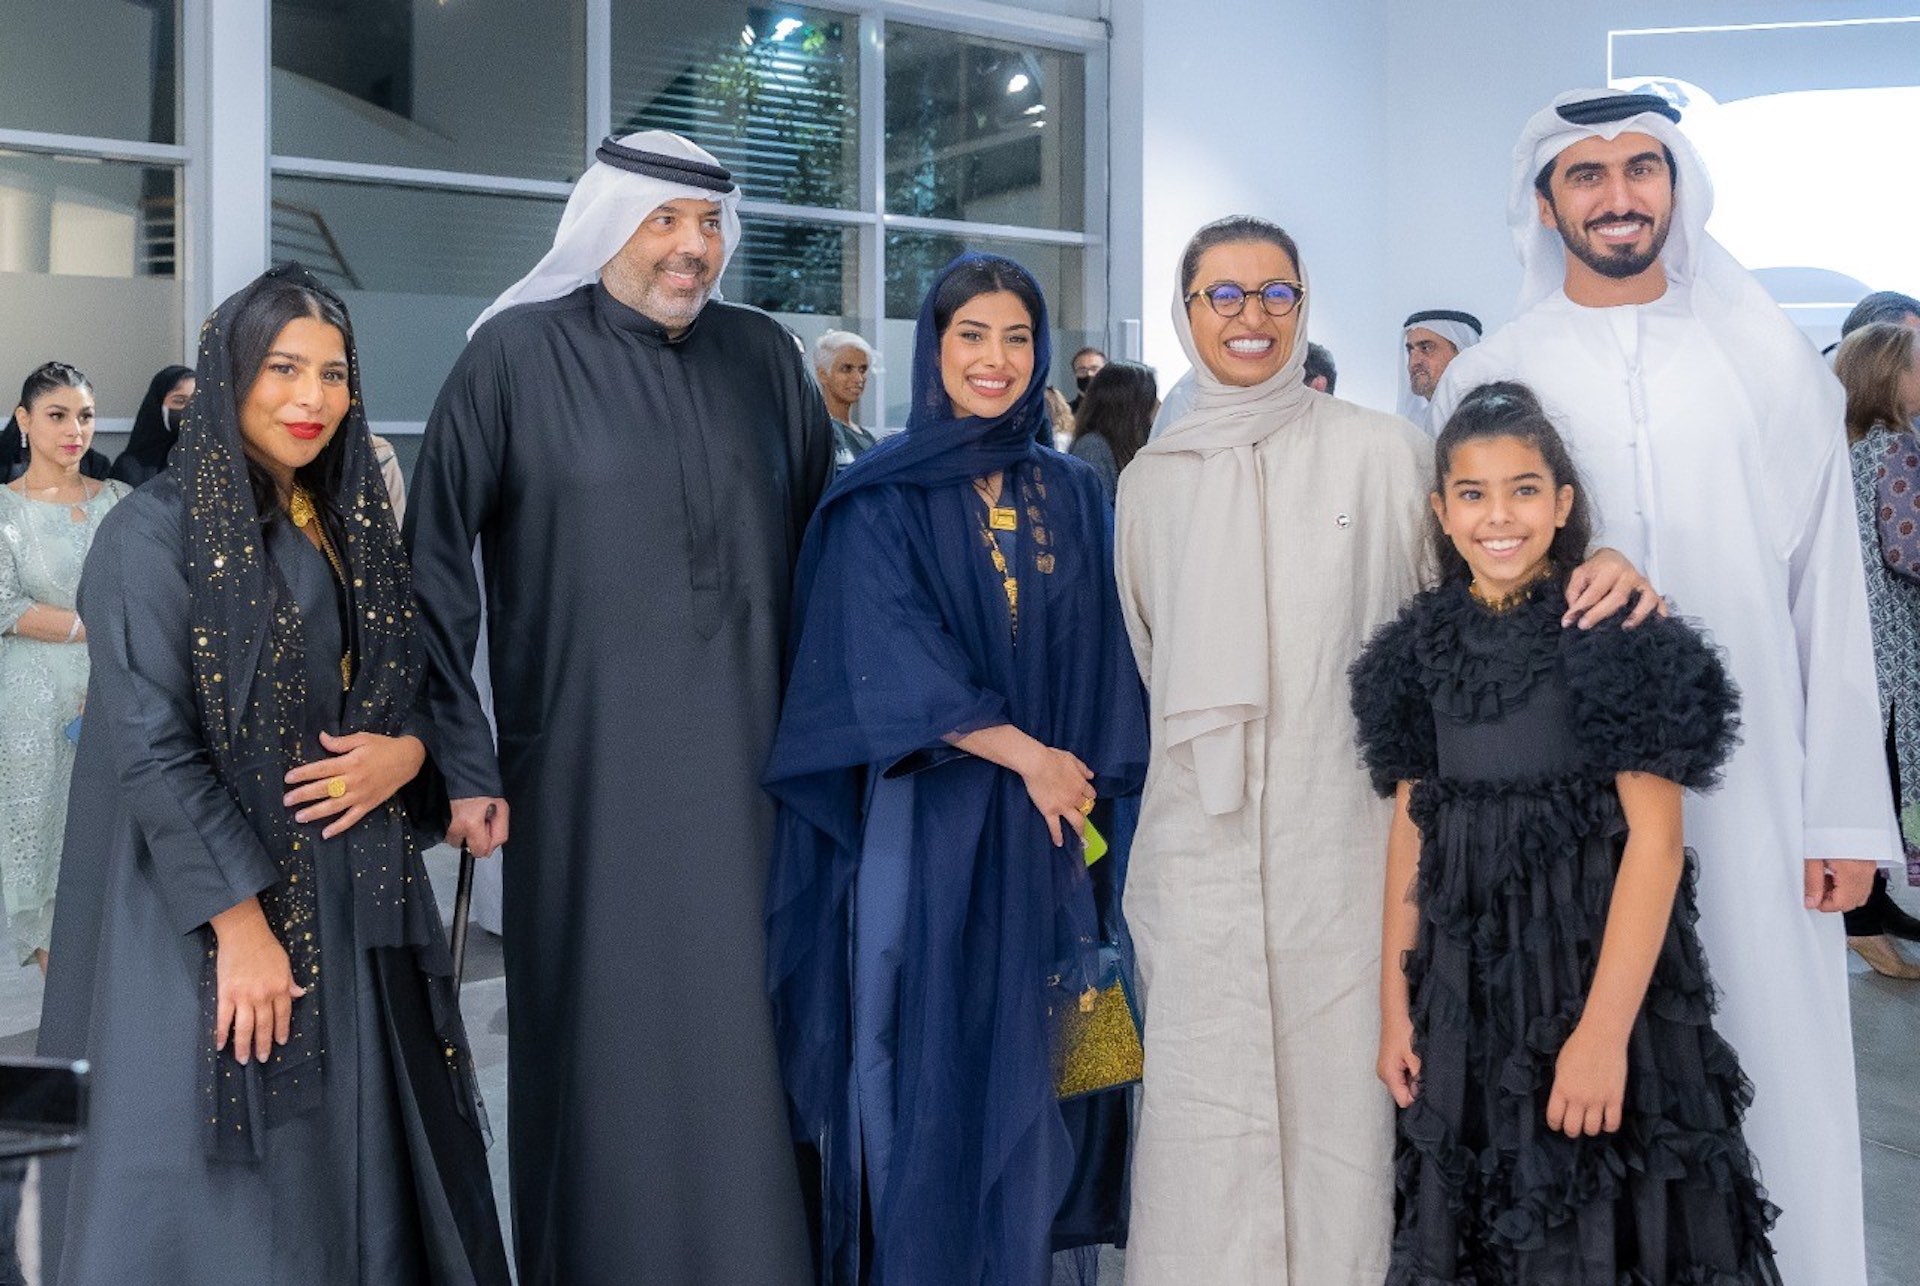 Dubai launches a book on seven emirates of the UAE in 50 portraits